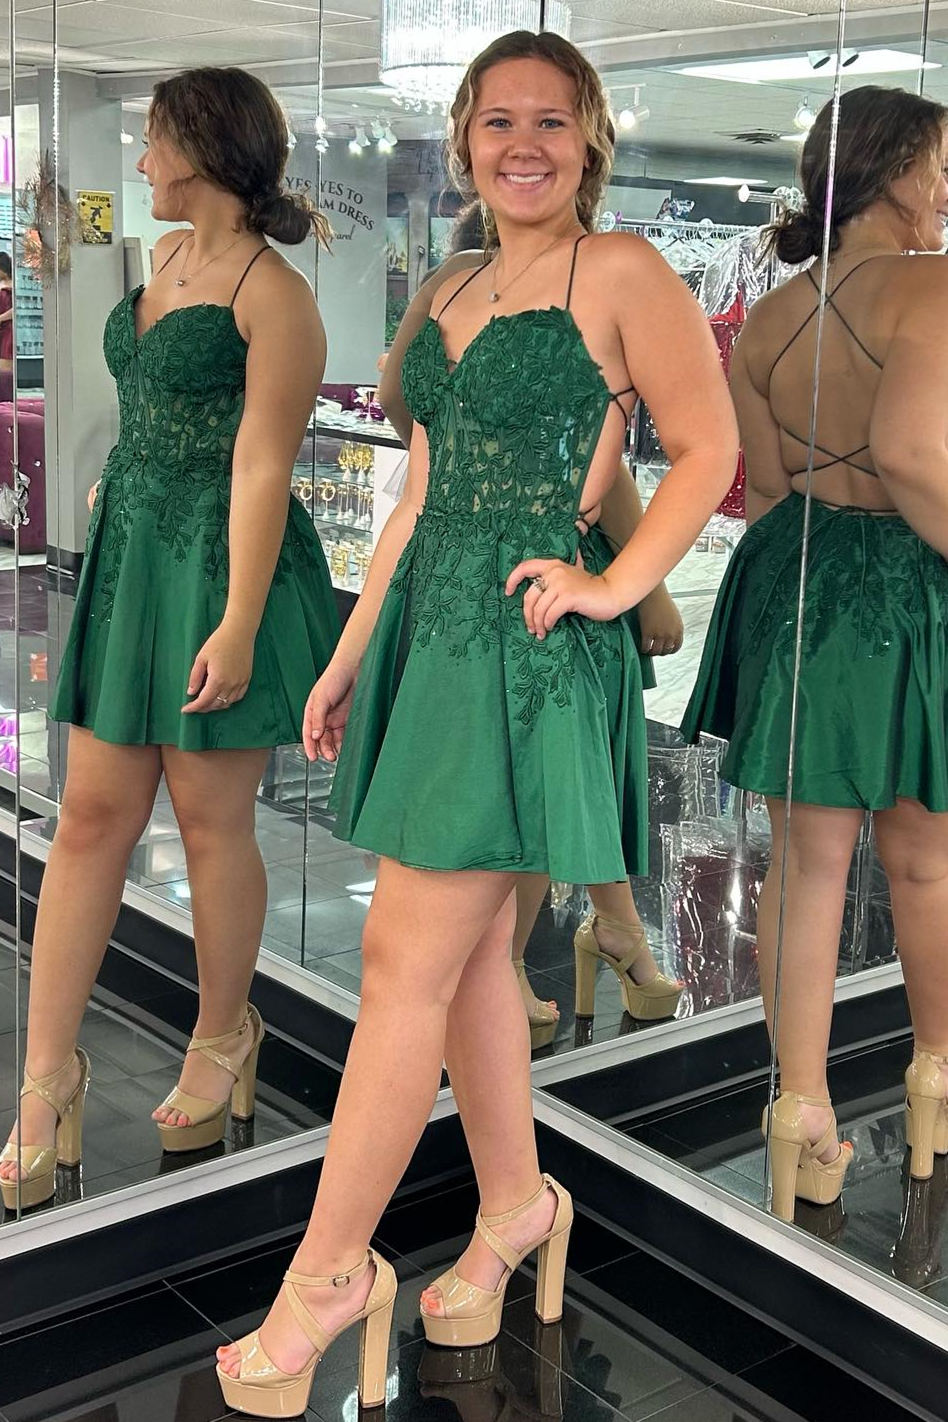 Strap Green Lace Corset Short Party Dress with Pockets – FancyVestido